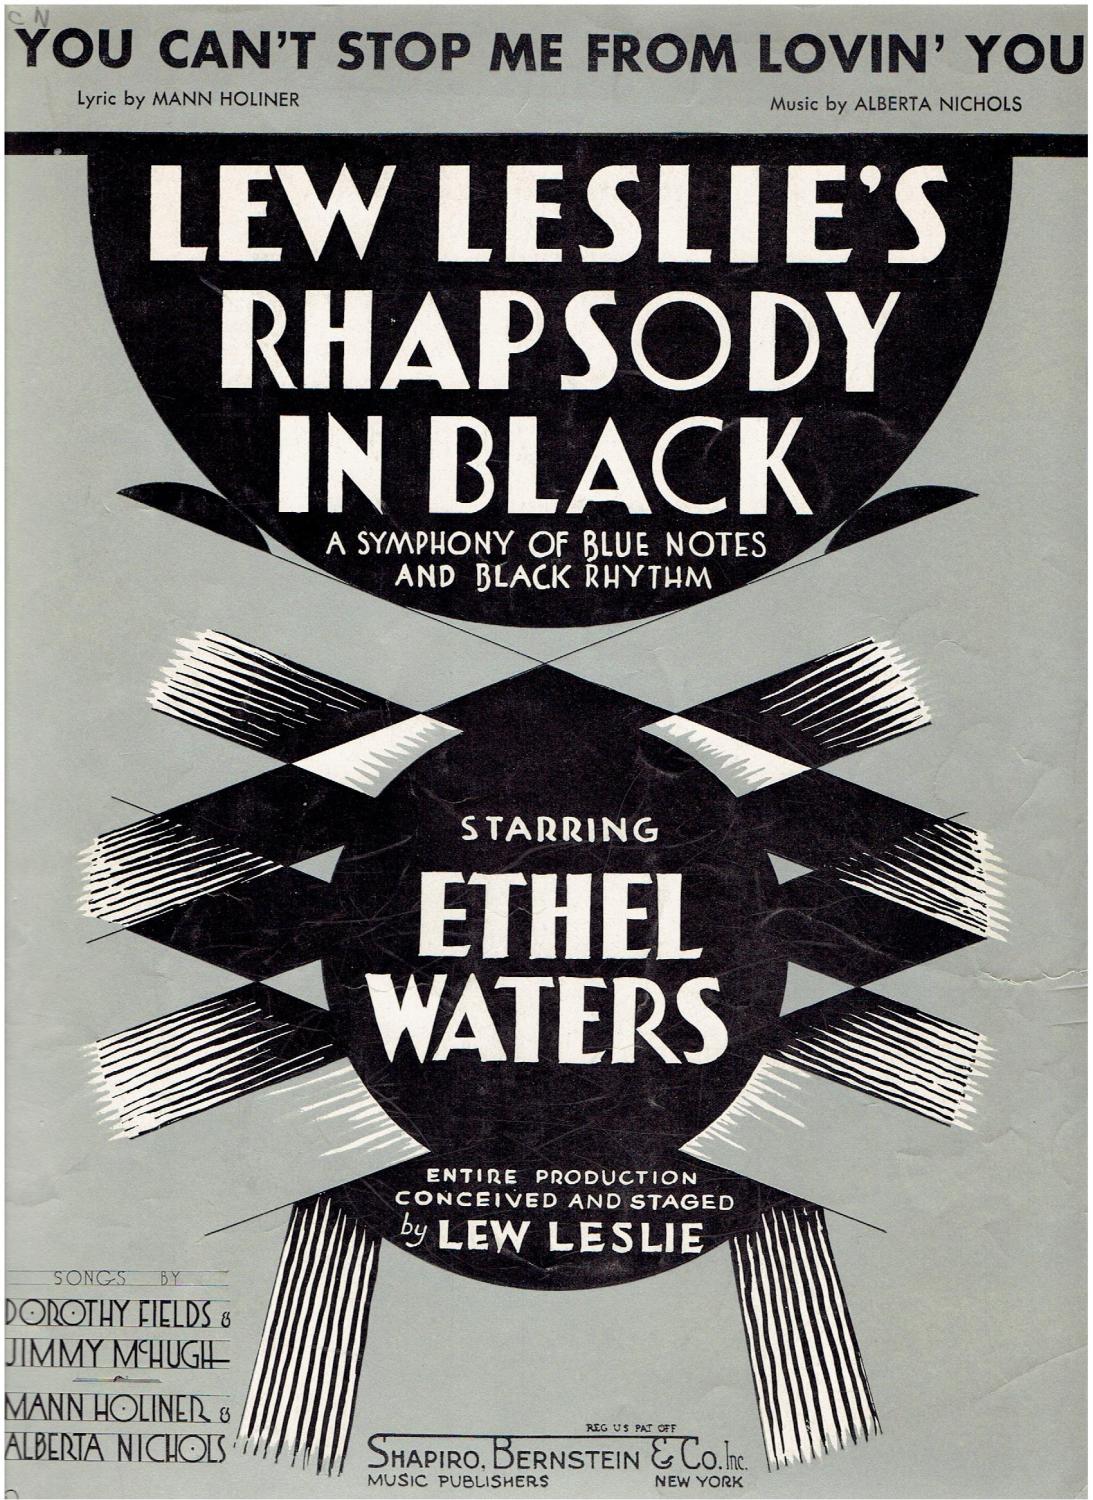 You Can T Stop Me From Lovin You Sheet Music From Lew Leslie S Rhapsody In Black Starring Ethel Walters By Music By Alberta Nichols And Lyrics By Mann Holiner 1931 Sheet Nbsp Music